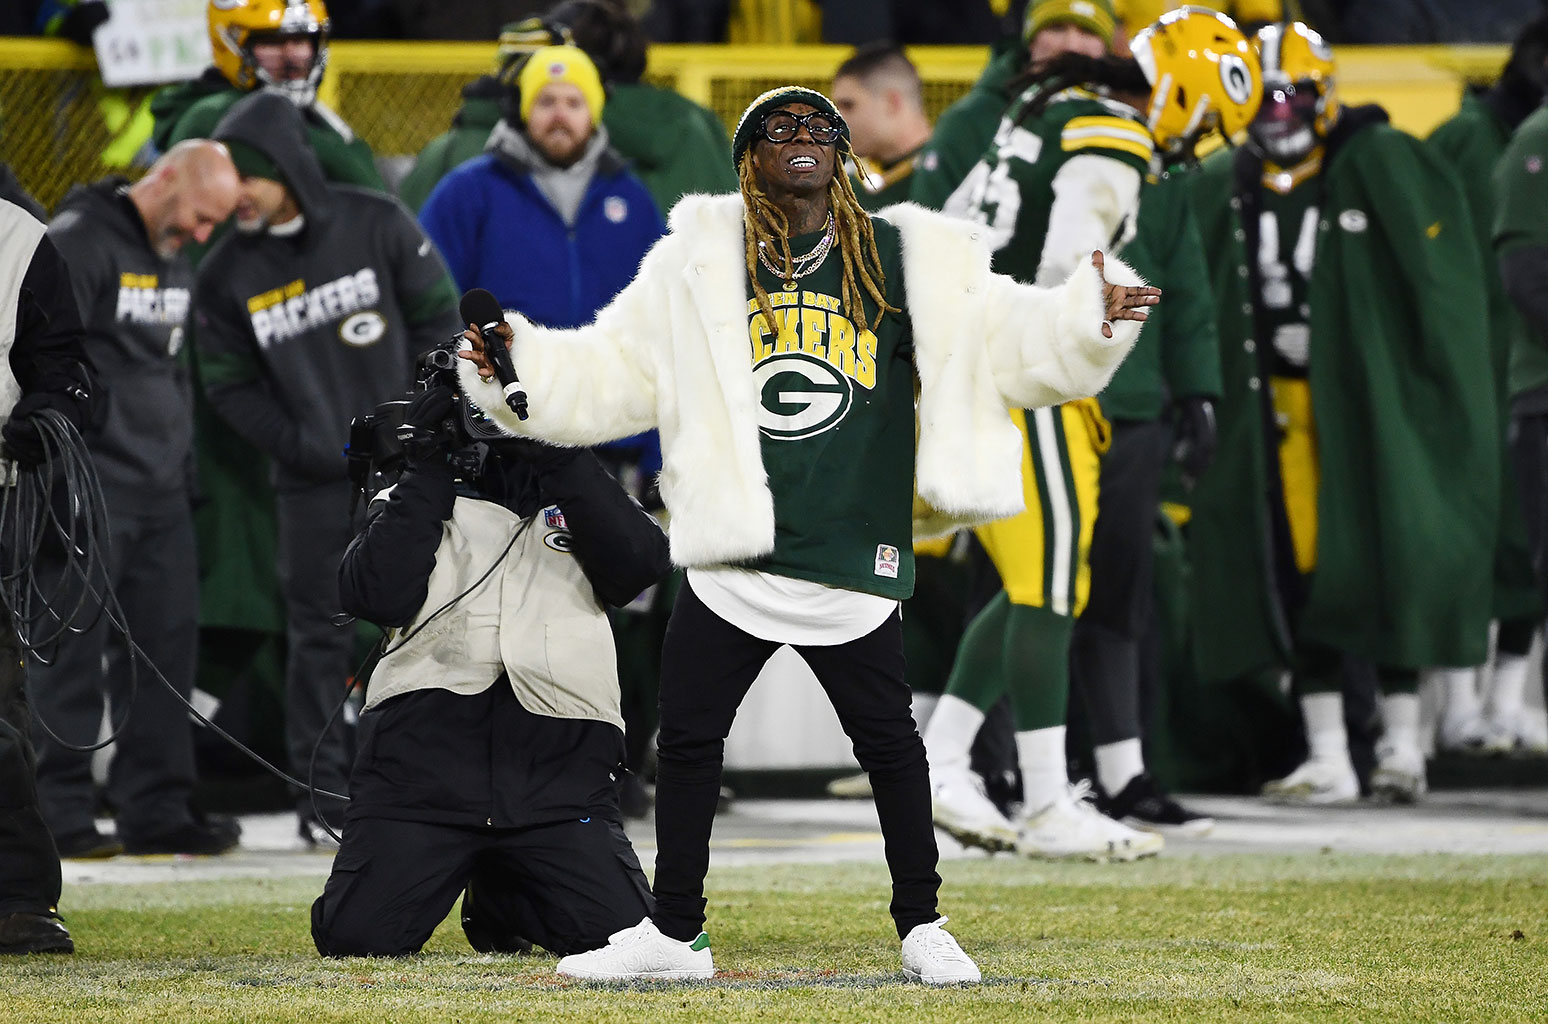 Lil Wayne Leads Packers' 'Roll Out the Barrel' Chant at Lambeau Field: 'One of the Dopest Times of My Life'